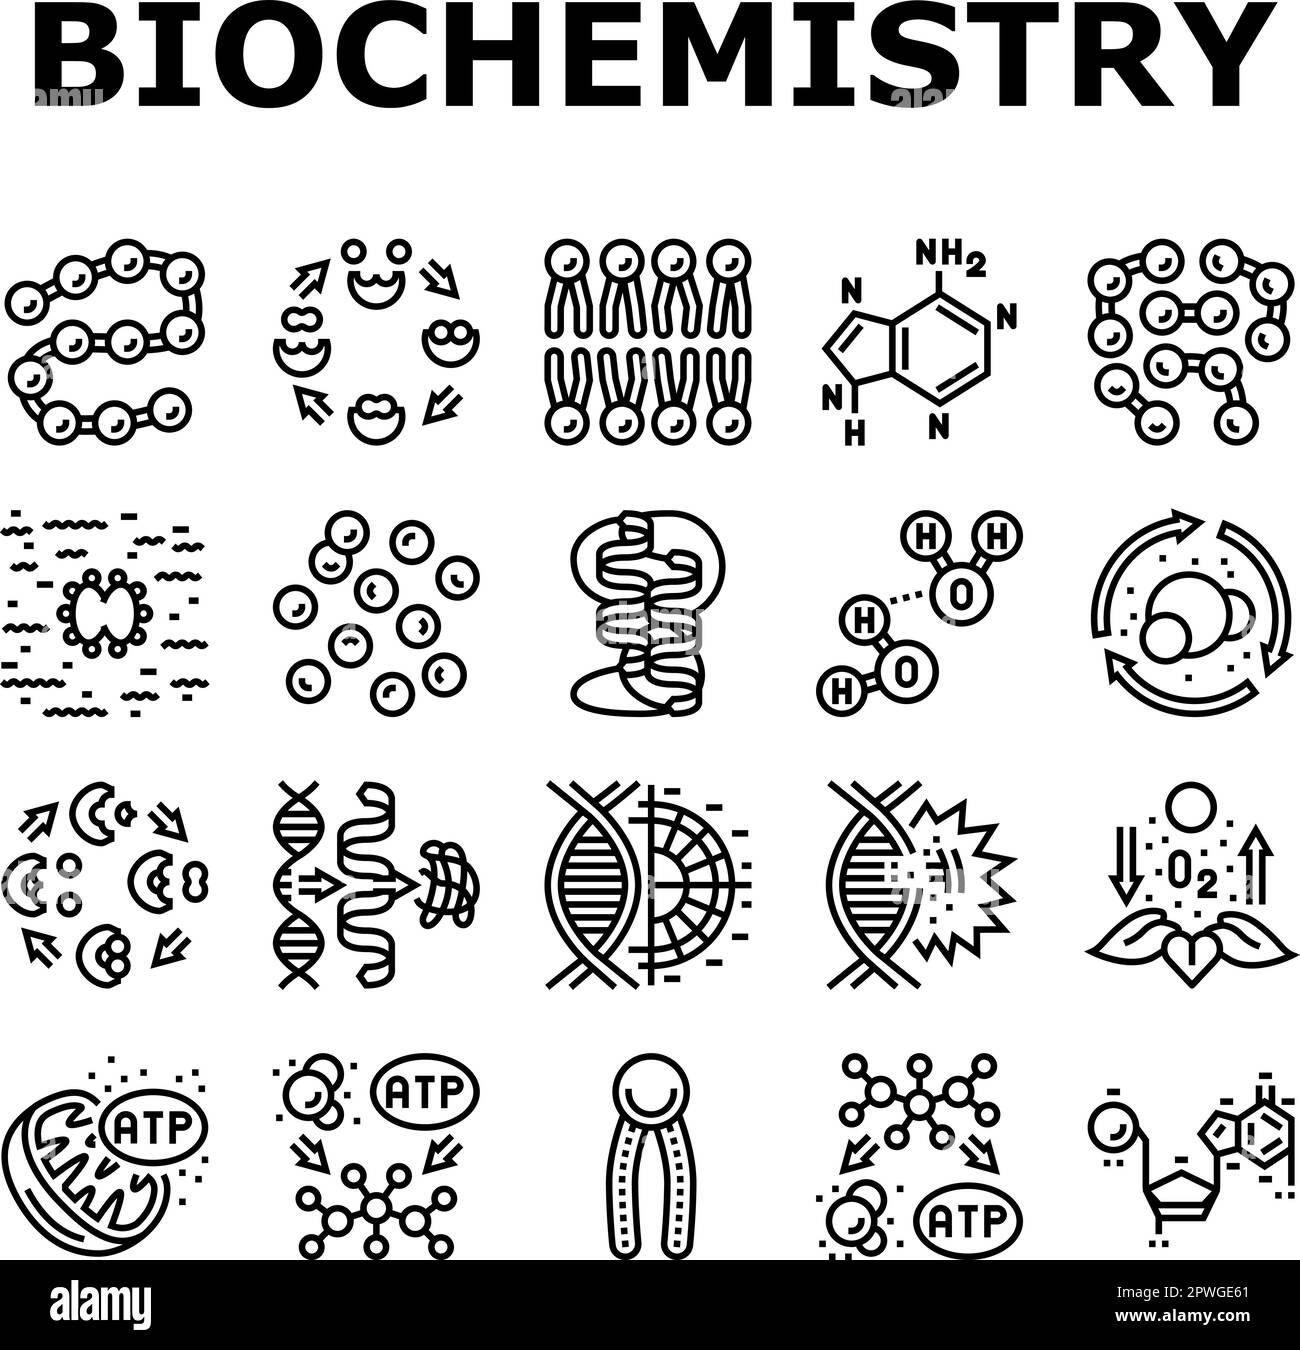 biotechnology chemistry science icons set vector Stock Vector